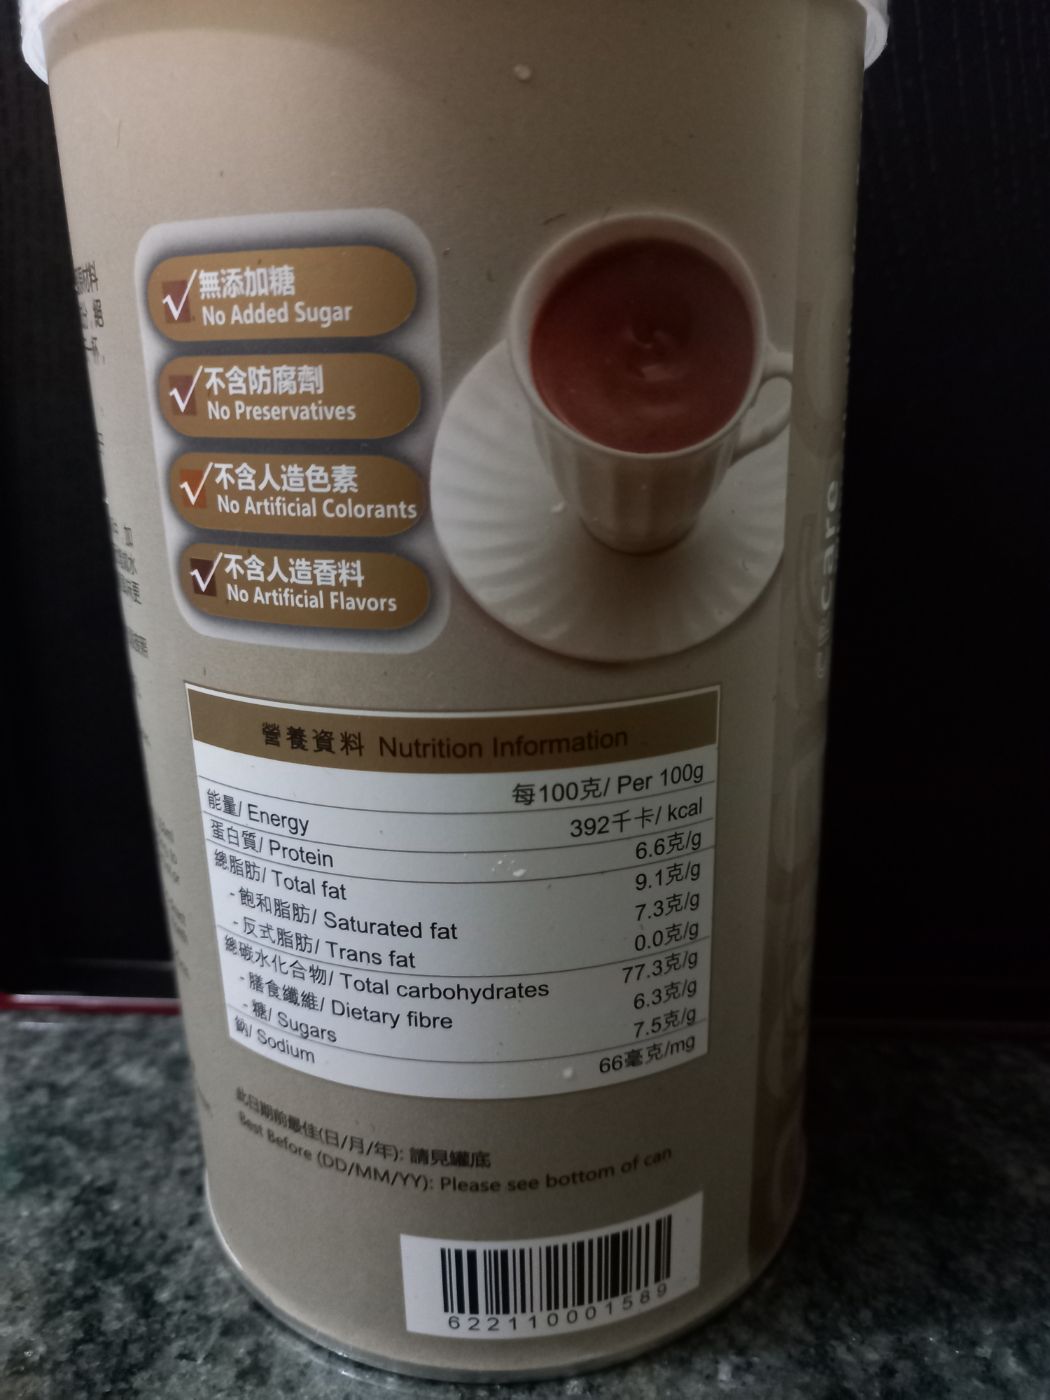 red cereal mix 紅五寶粉(500g)，HK.00  (2).jpg